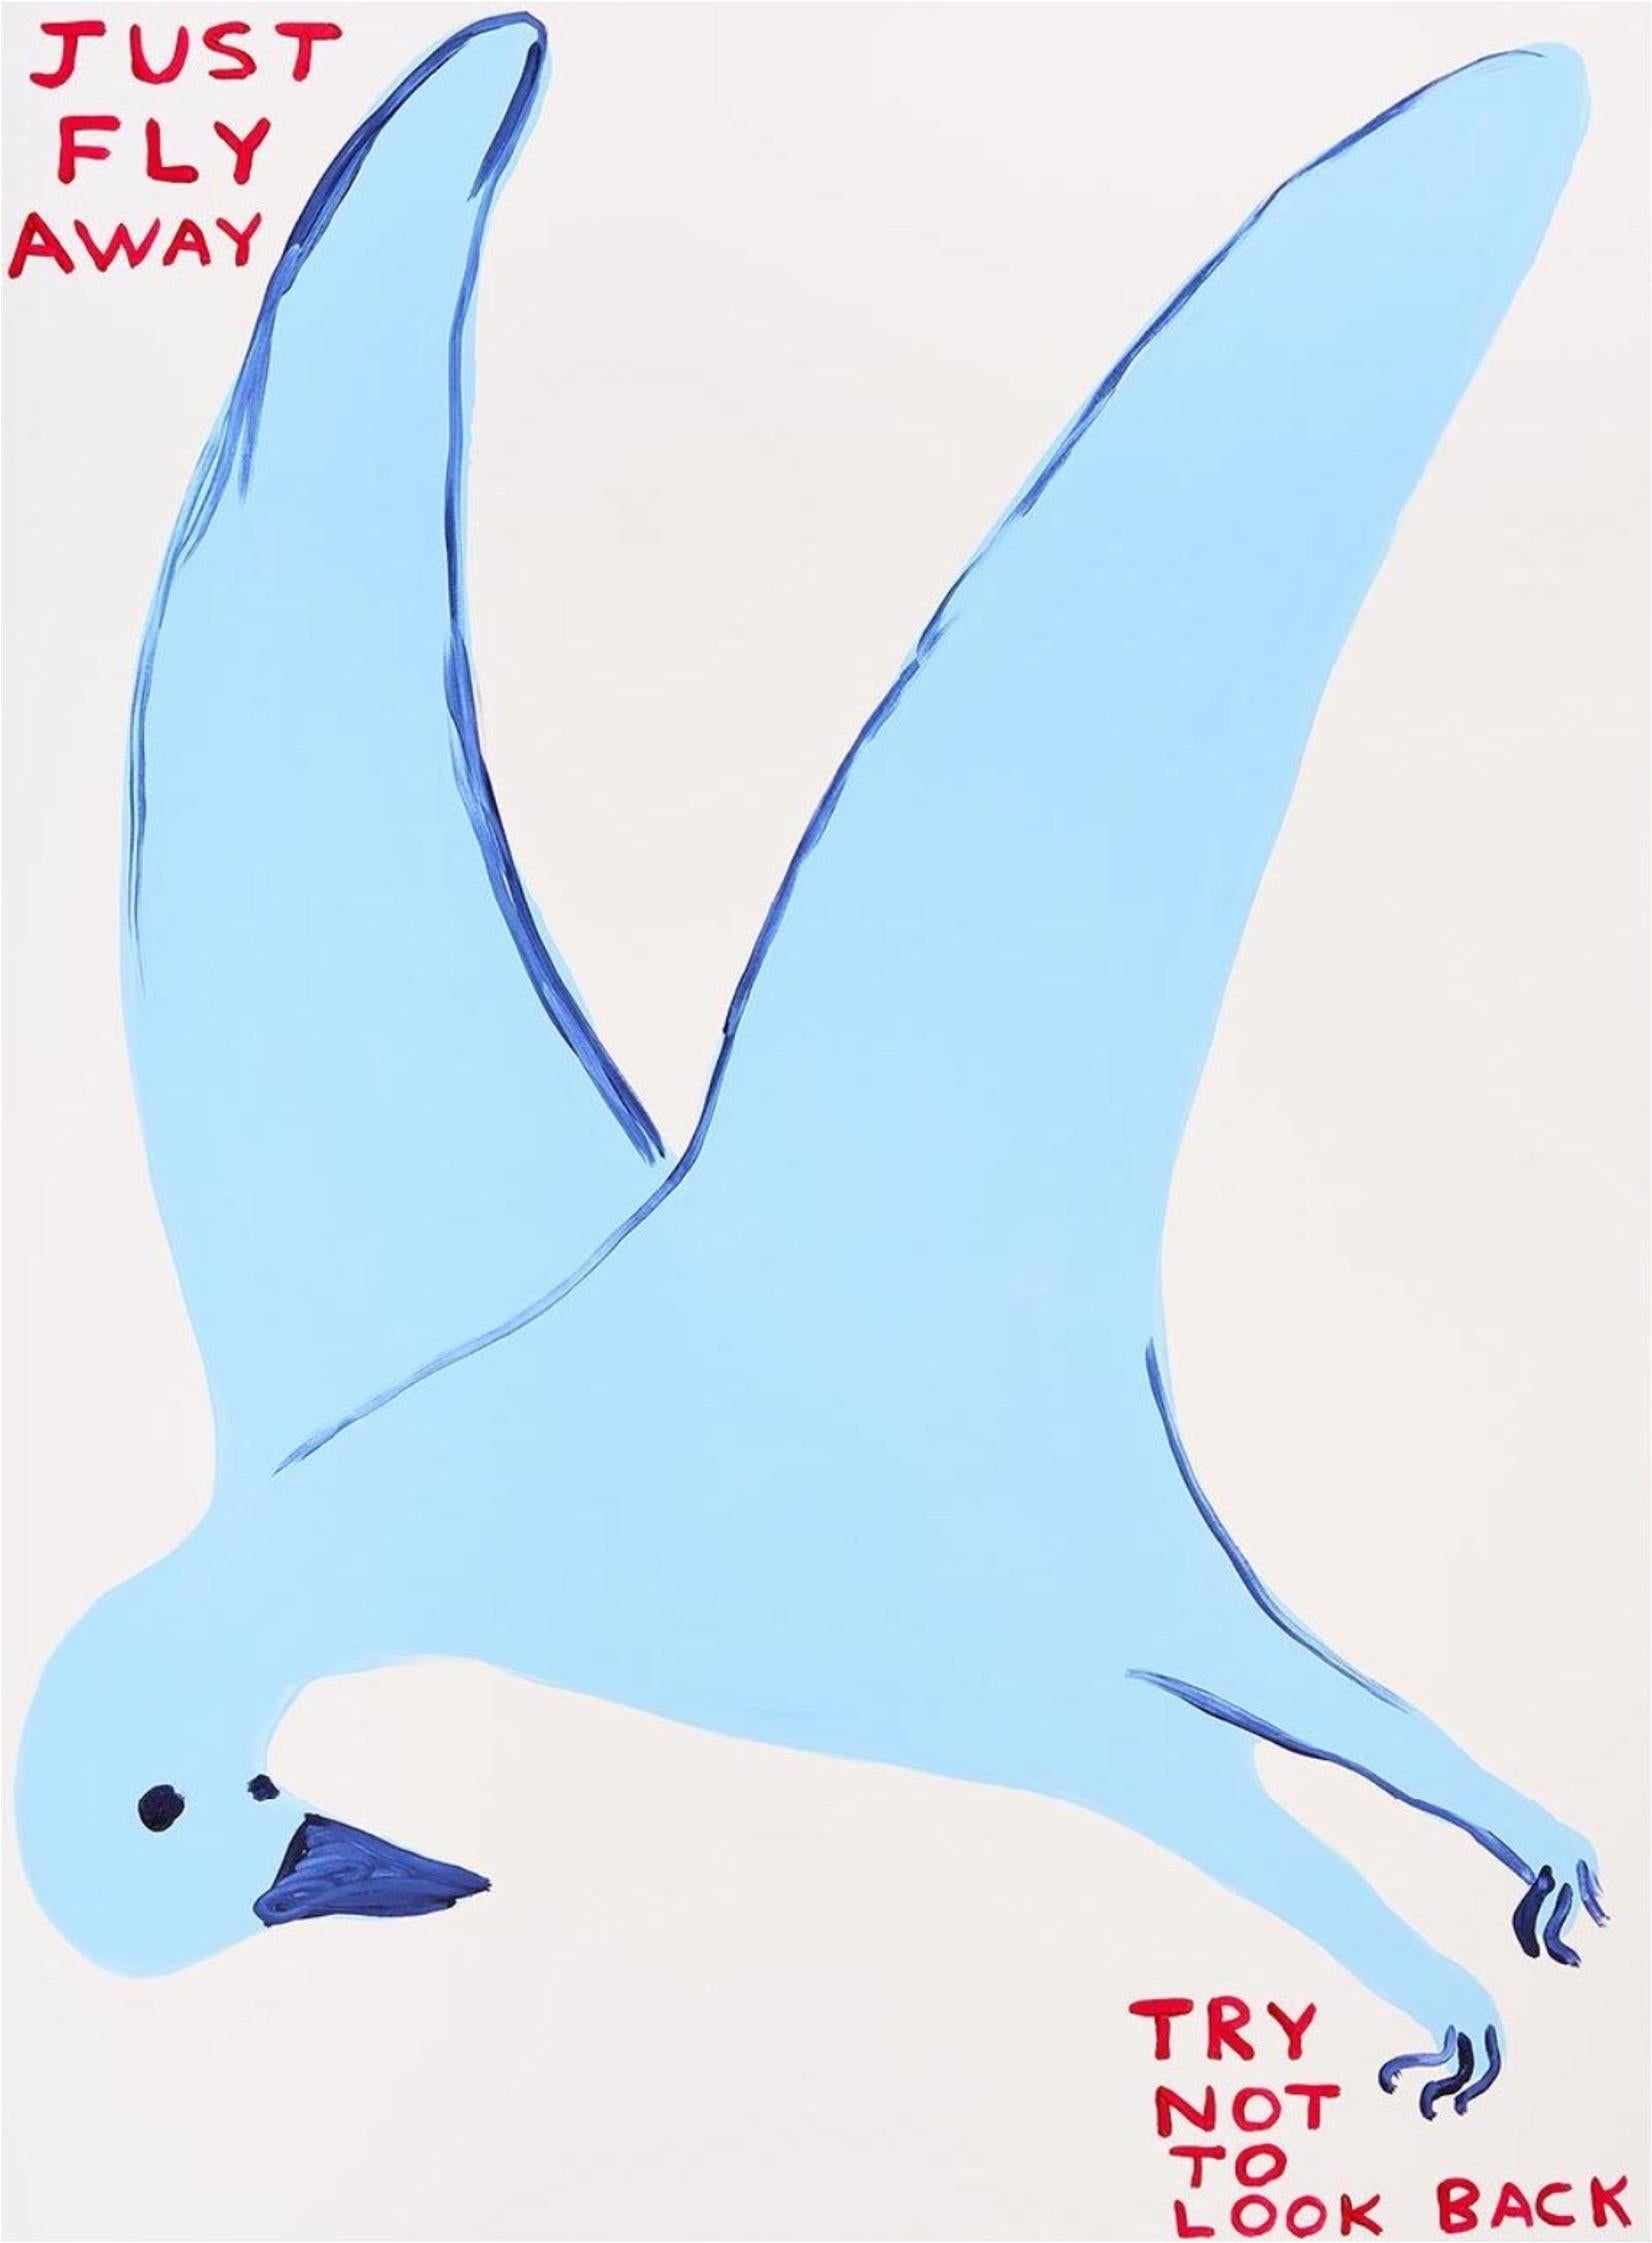 David Shrigley
Untitled (Just Fly Away, Try Not to Look Back), 2022
Screenprint in colours
29 1/2 × 22 in  75 × 56 cm
Edition of 125